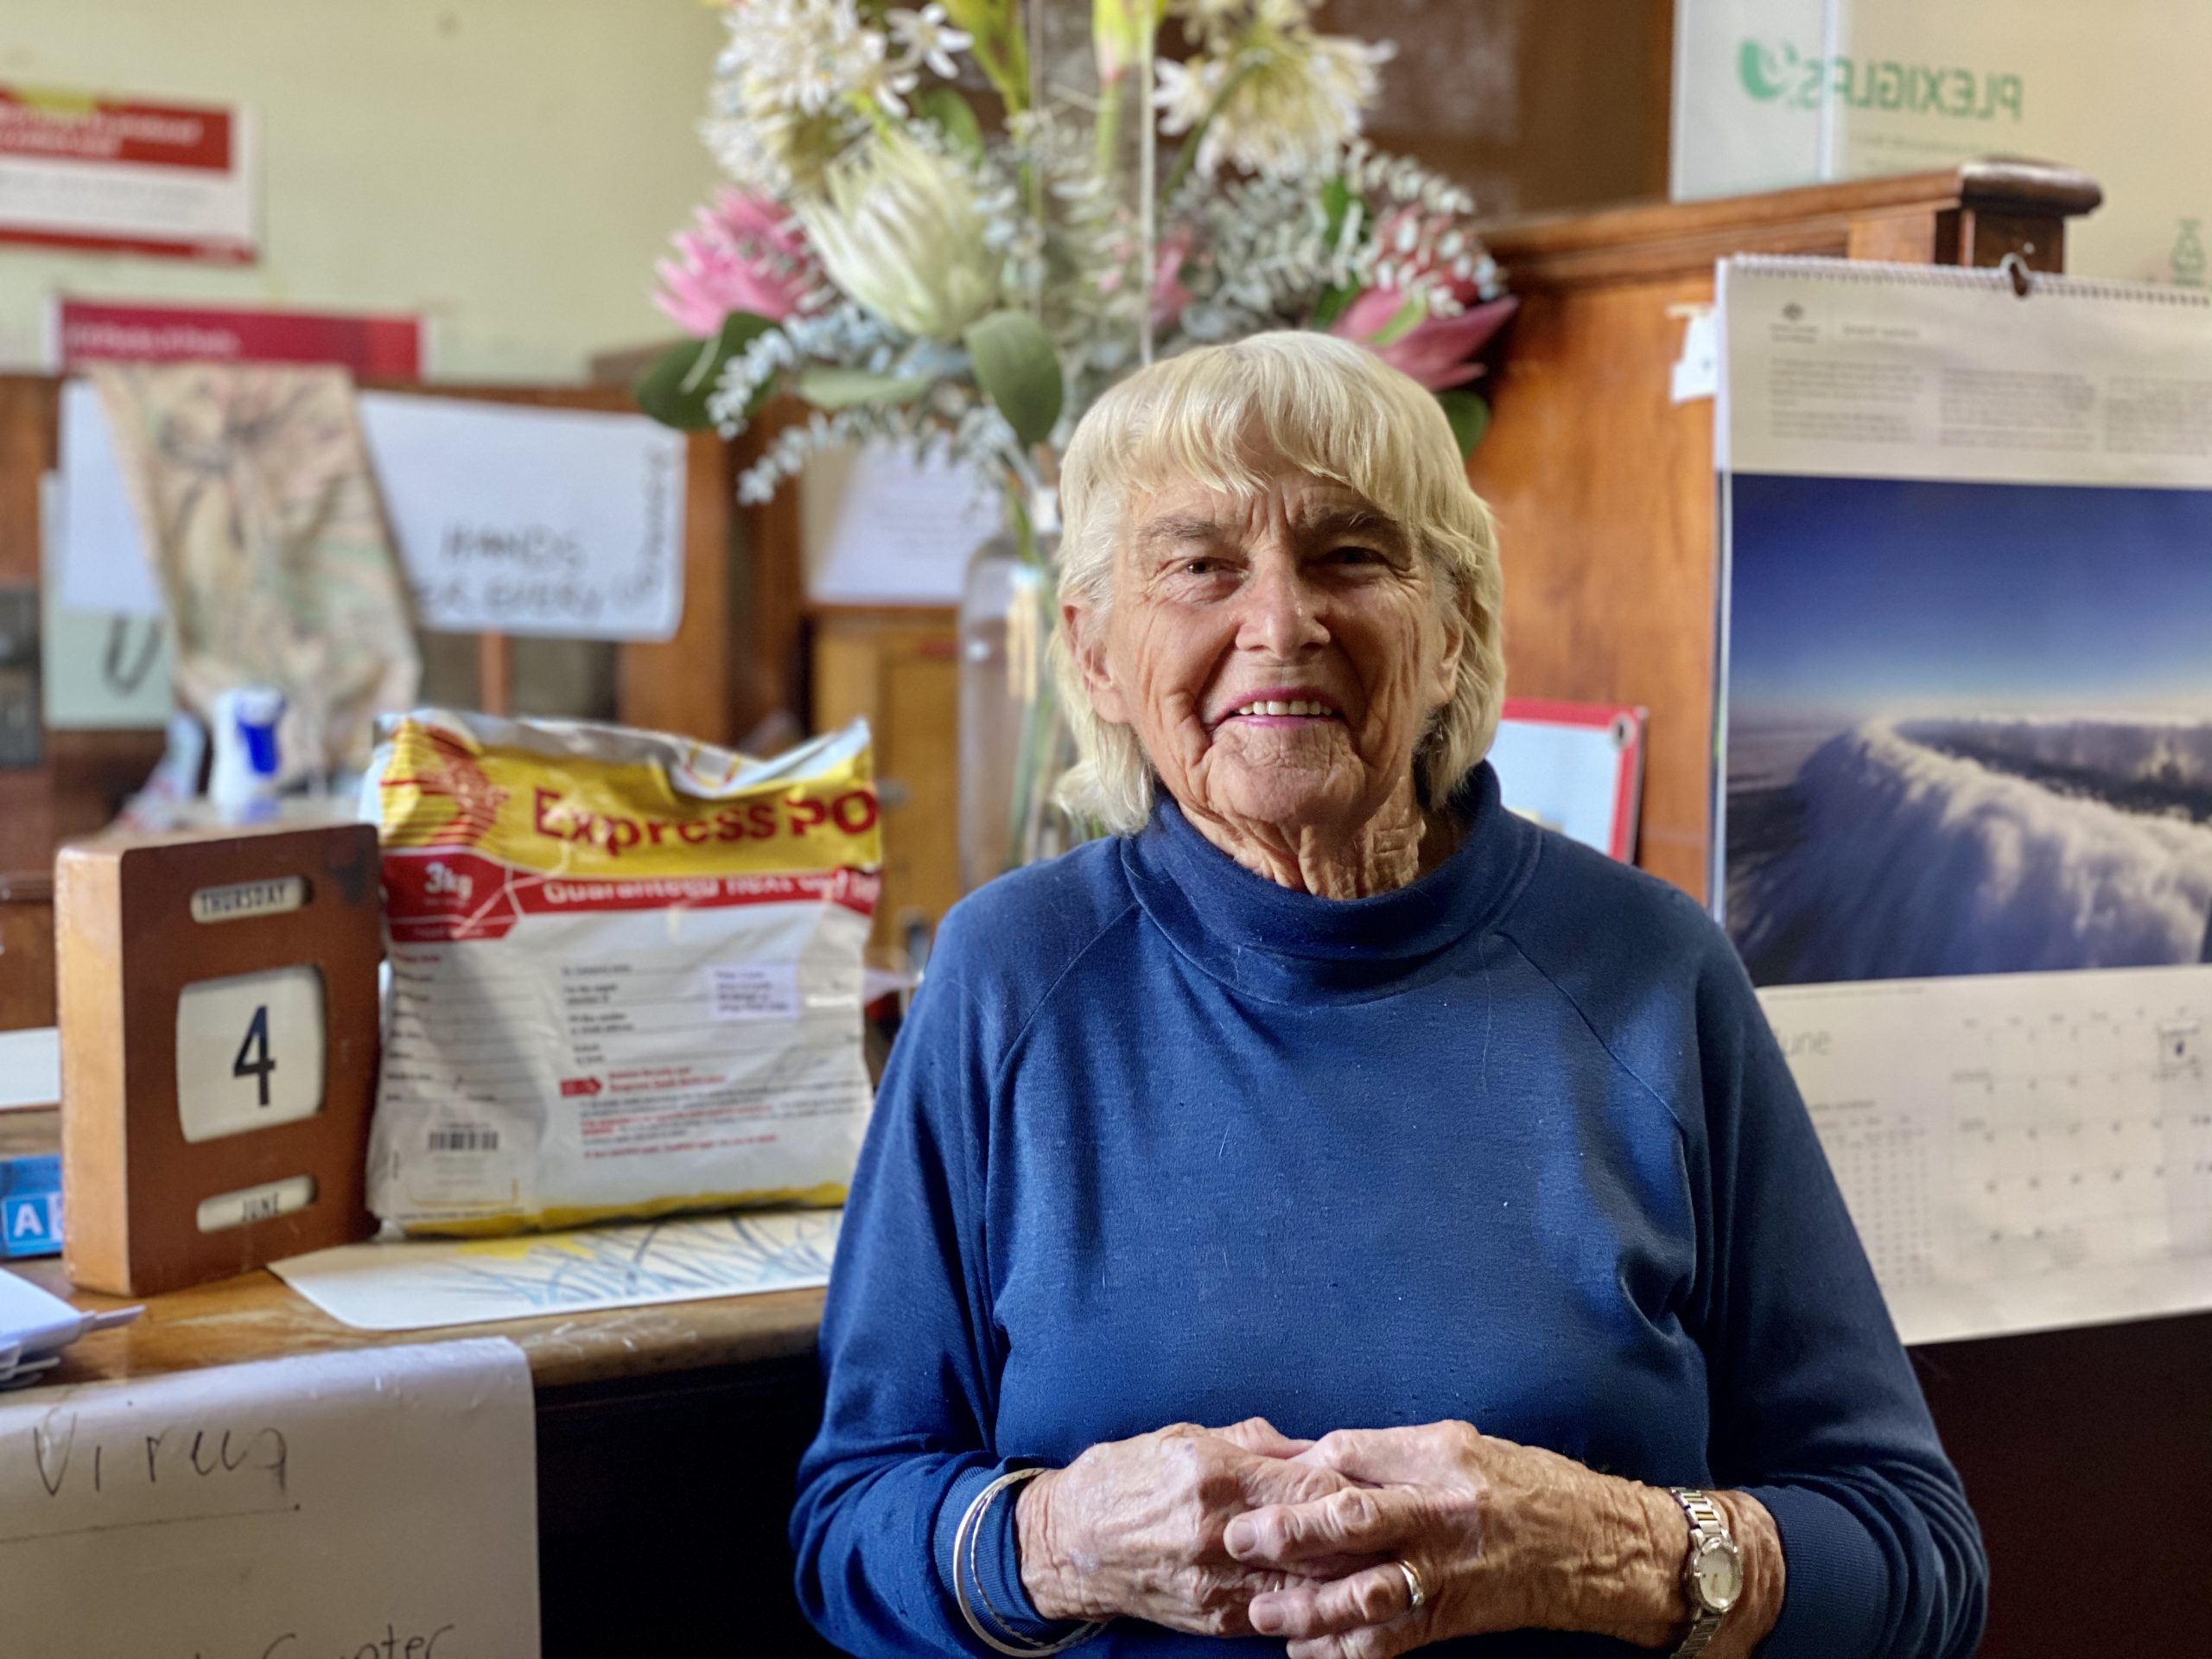 “Get up and have a go”: 81-year-old Pilliga Post Office licensee Merle Wooldridge shares words of wisdom